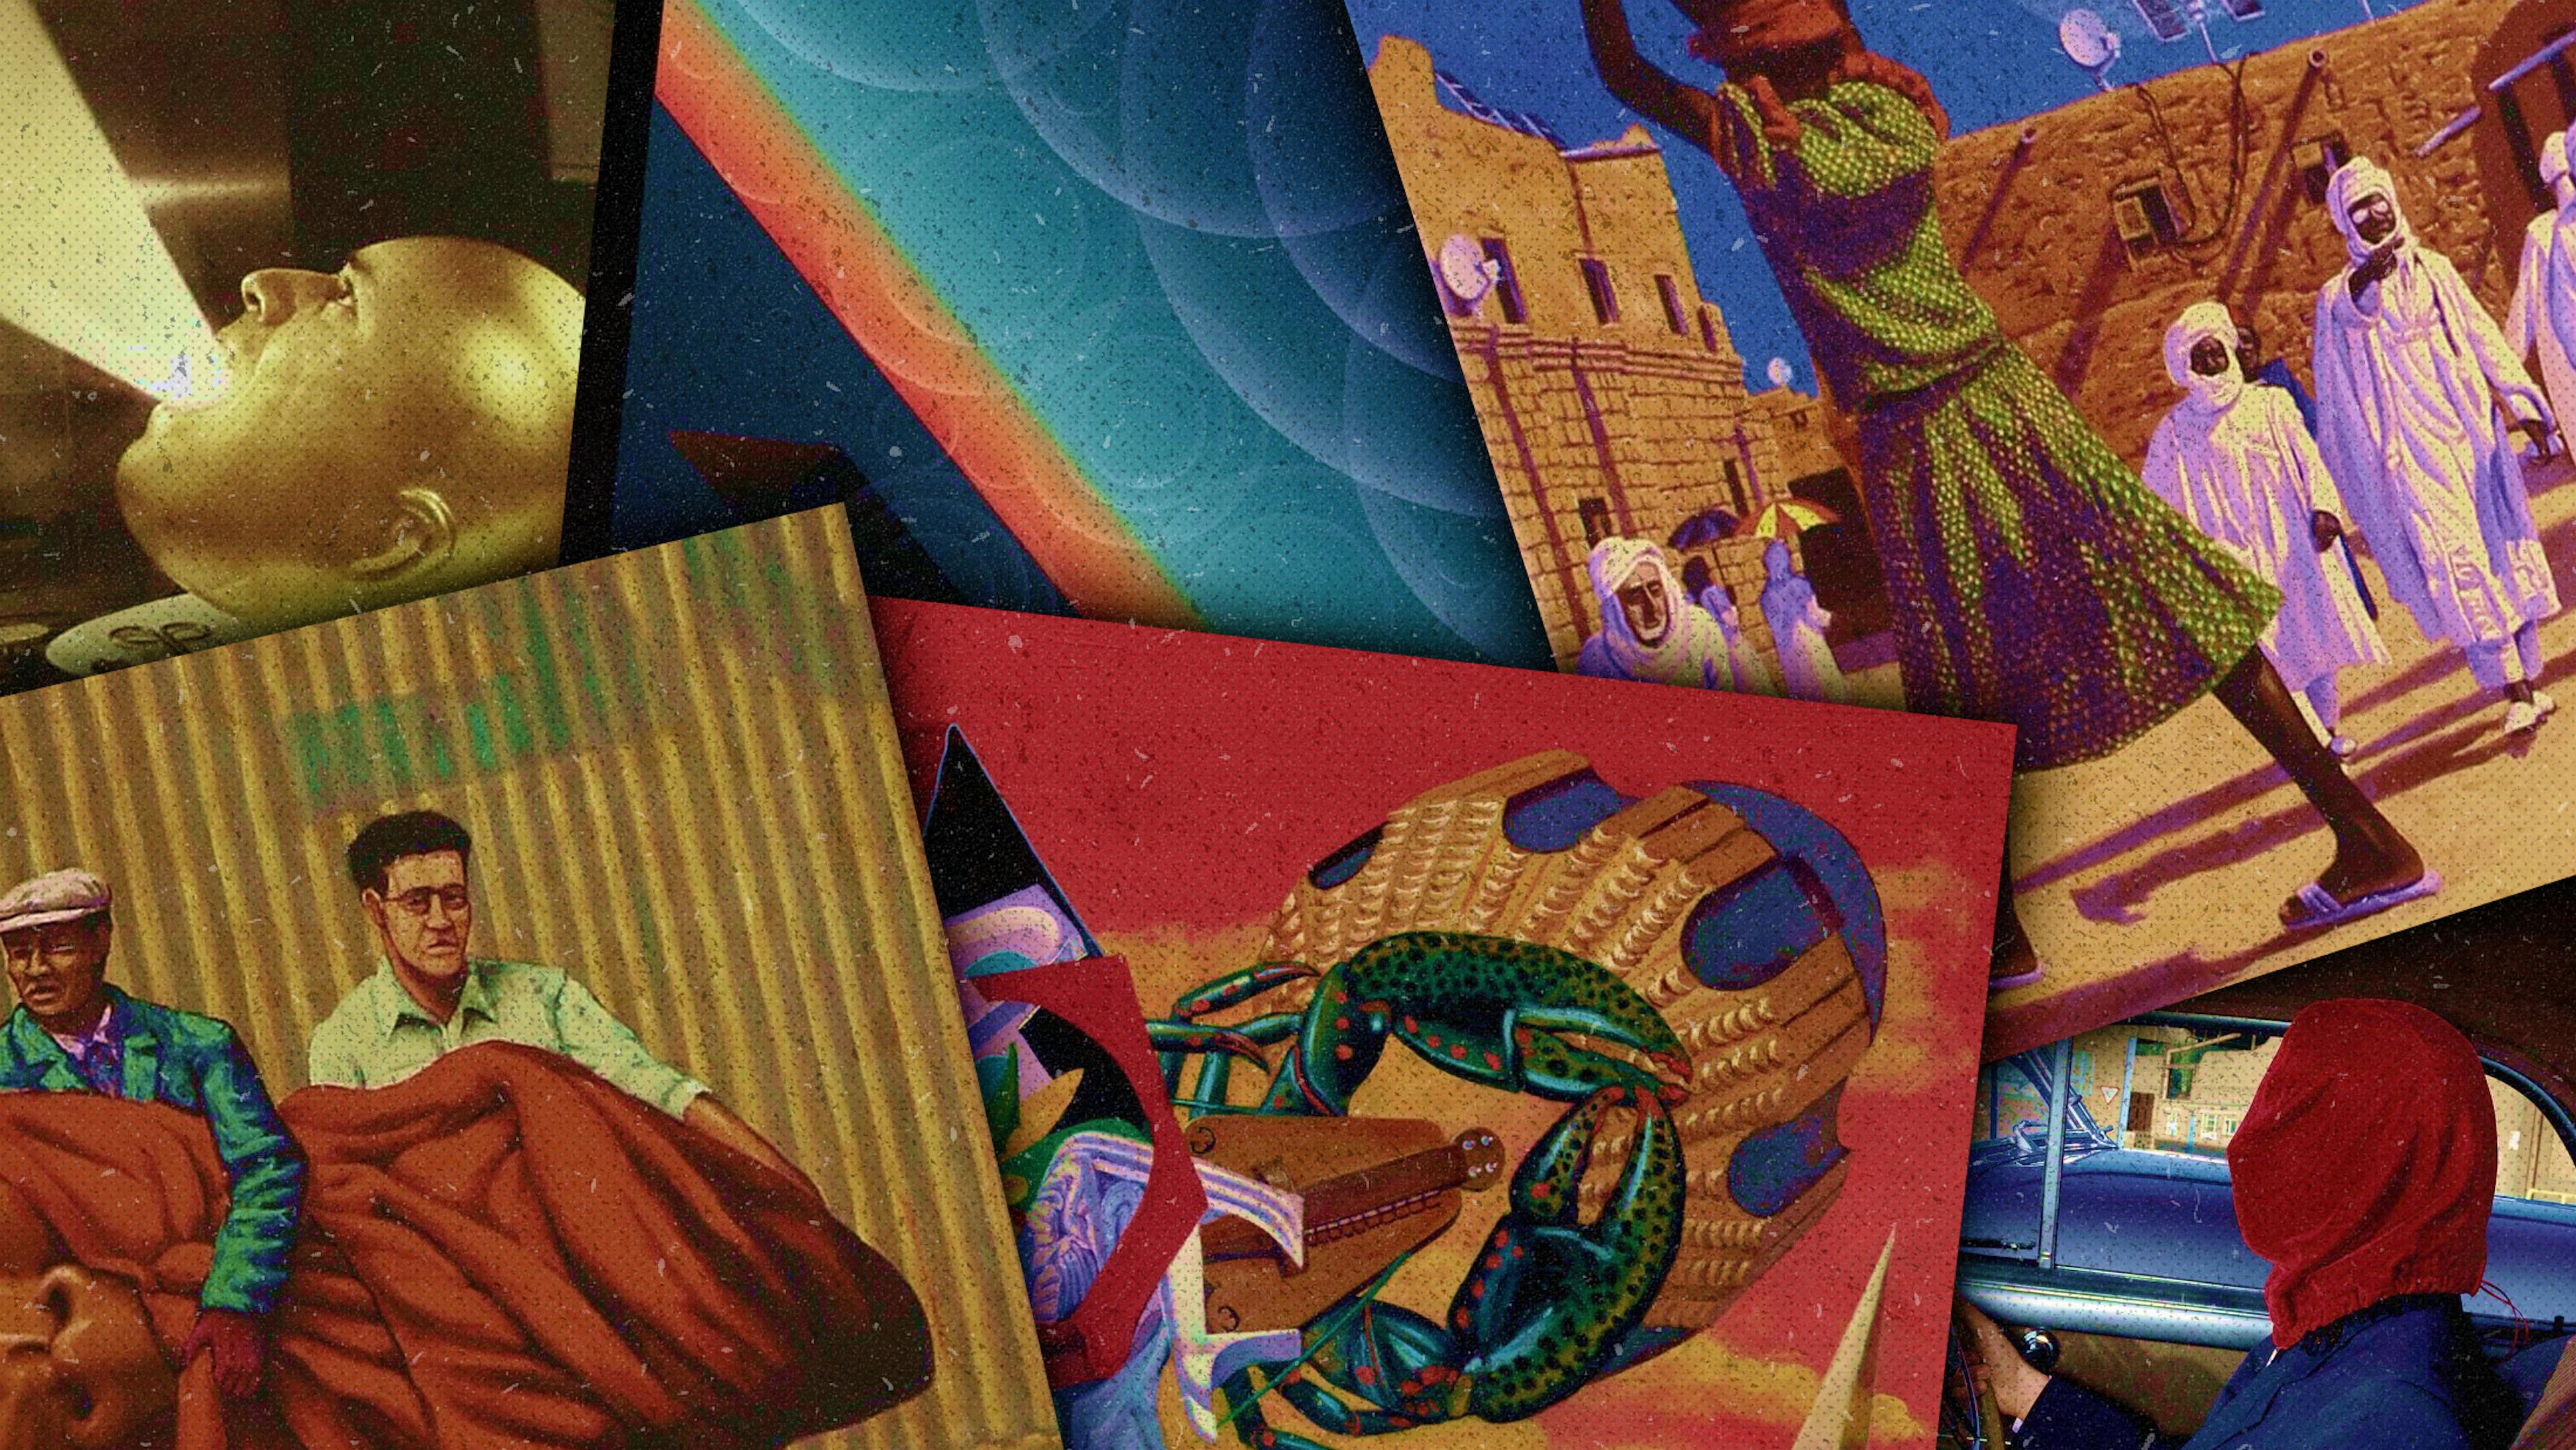 The Mars Volta: Every album ranked from worst to best